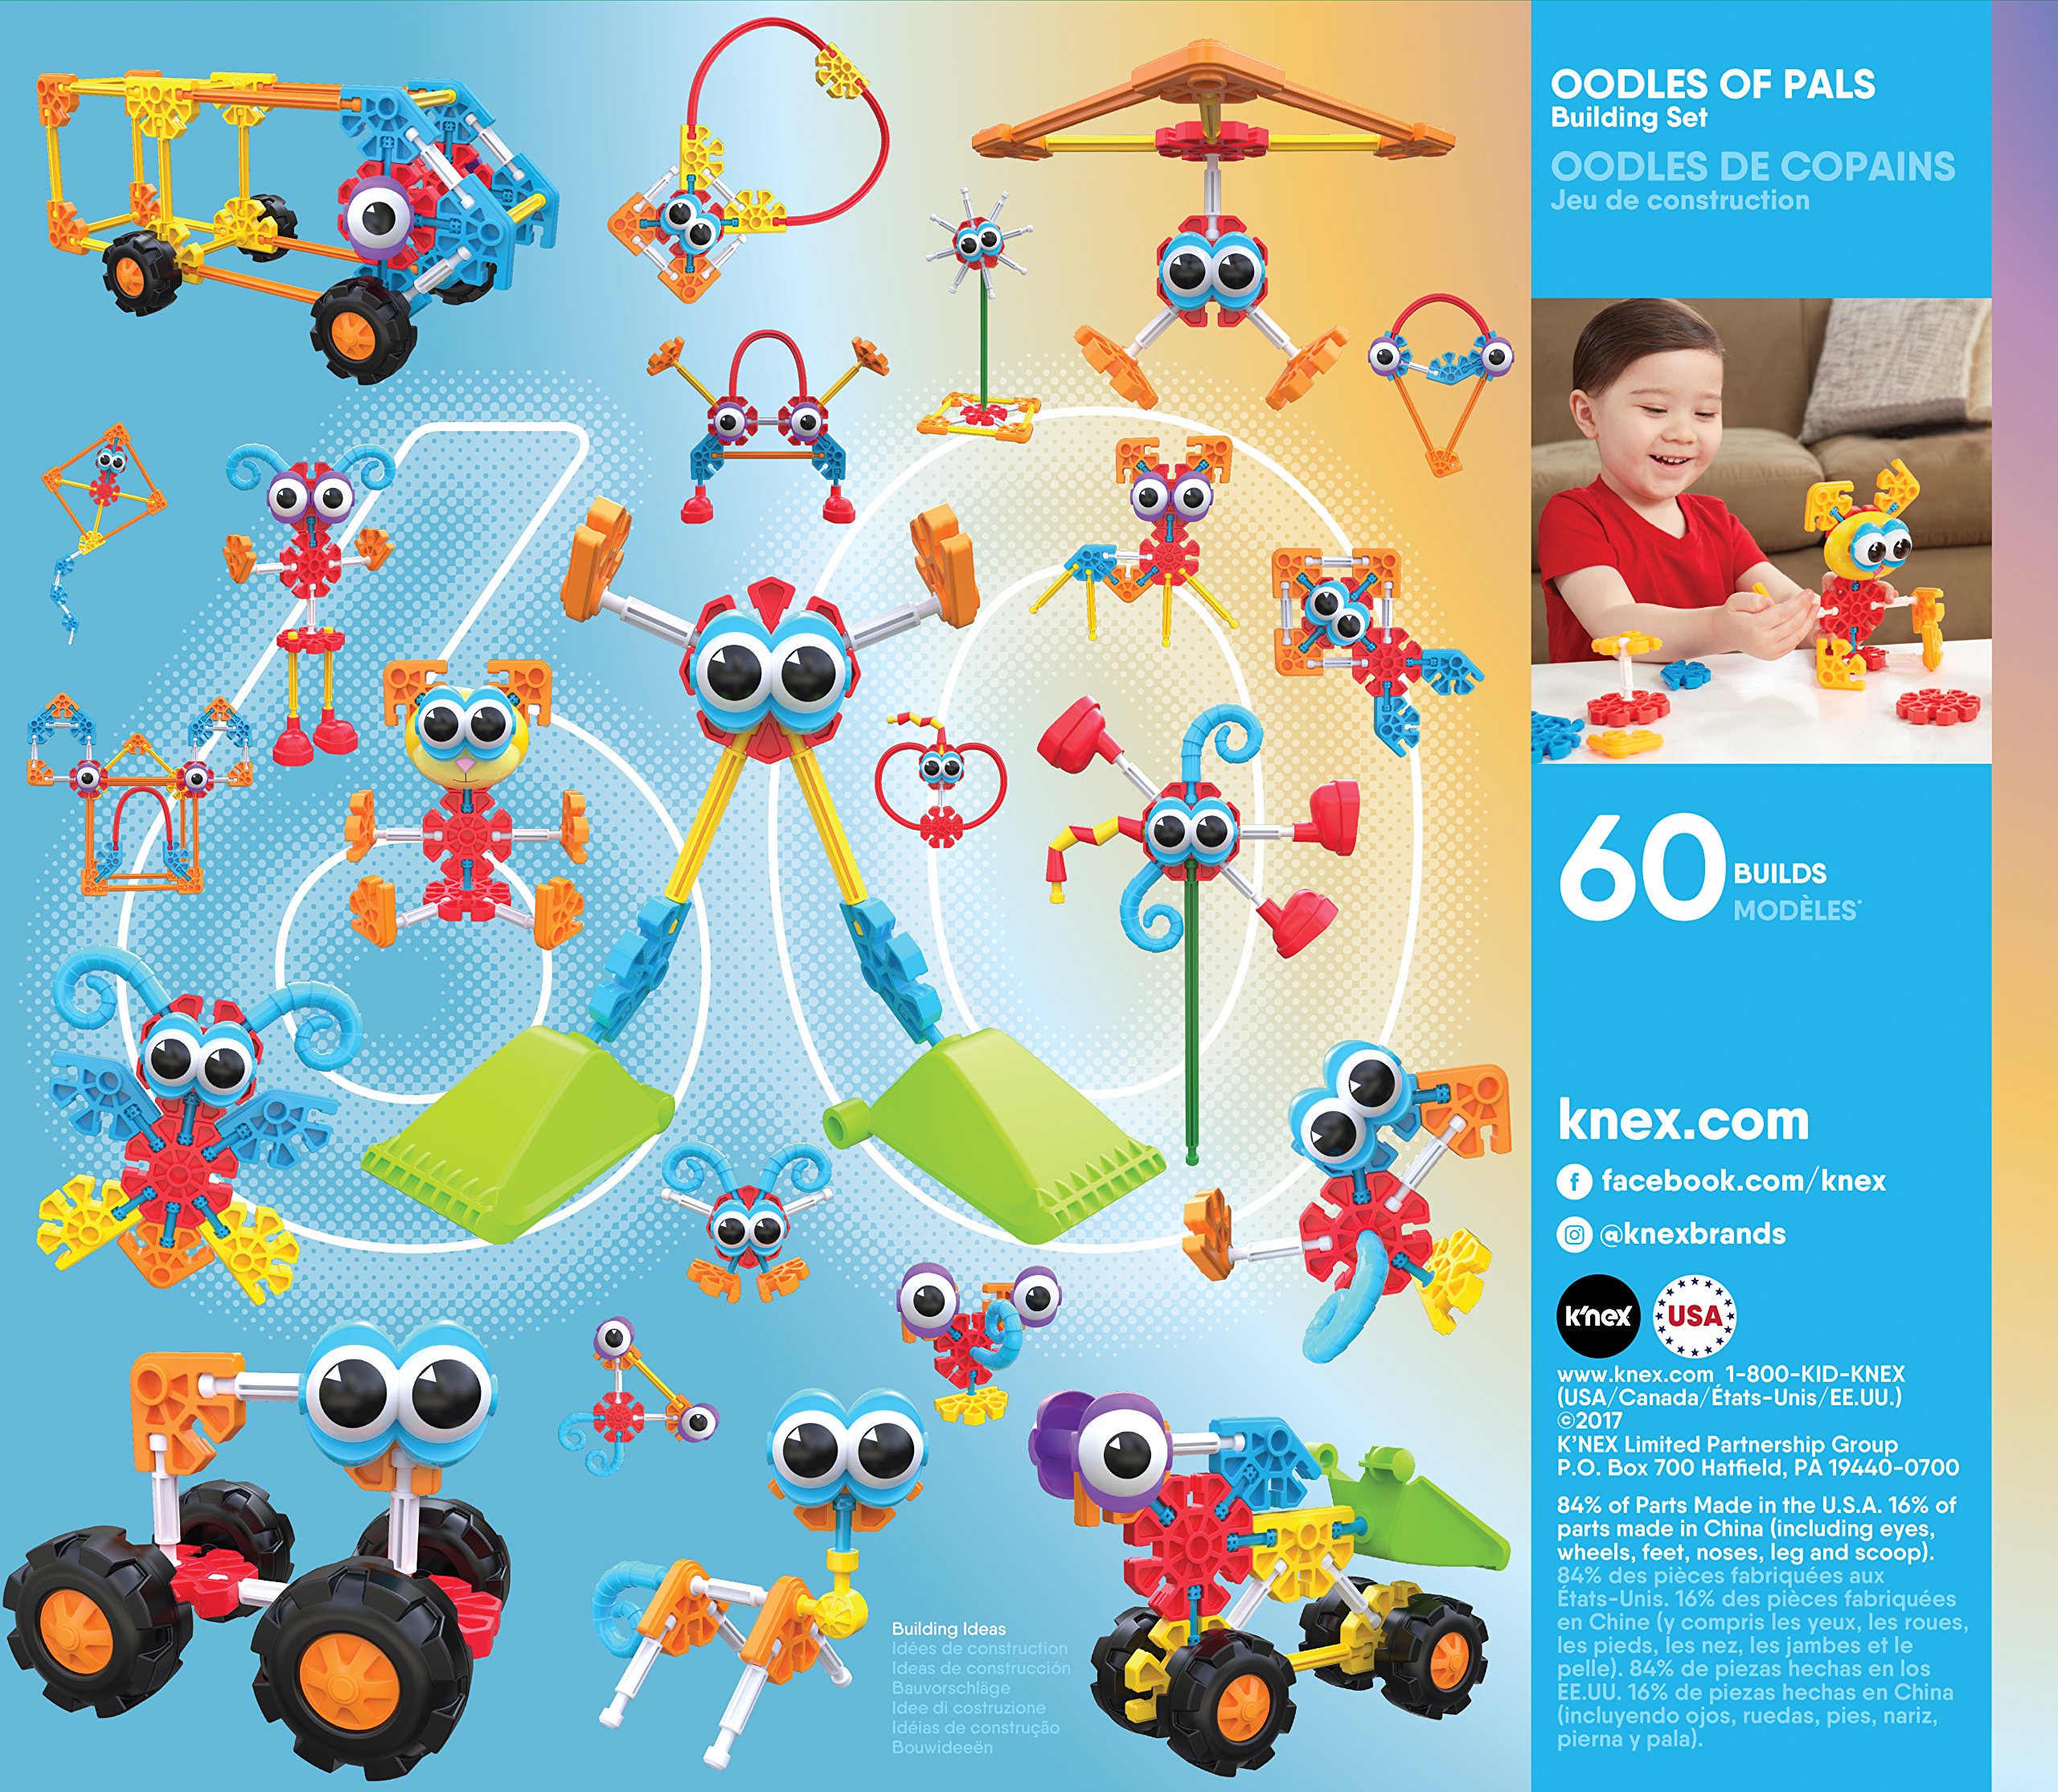 KID K’NEX – Oodles of Pals Building Set – 116 Pieces – Ages 3 and Up Preschool Educational Toy (Amazon Exclusive)